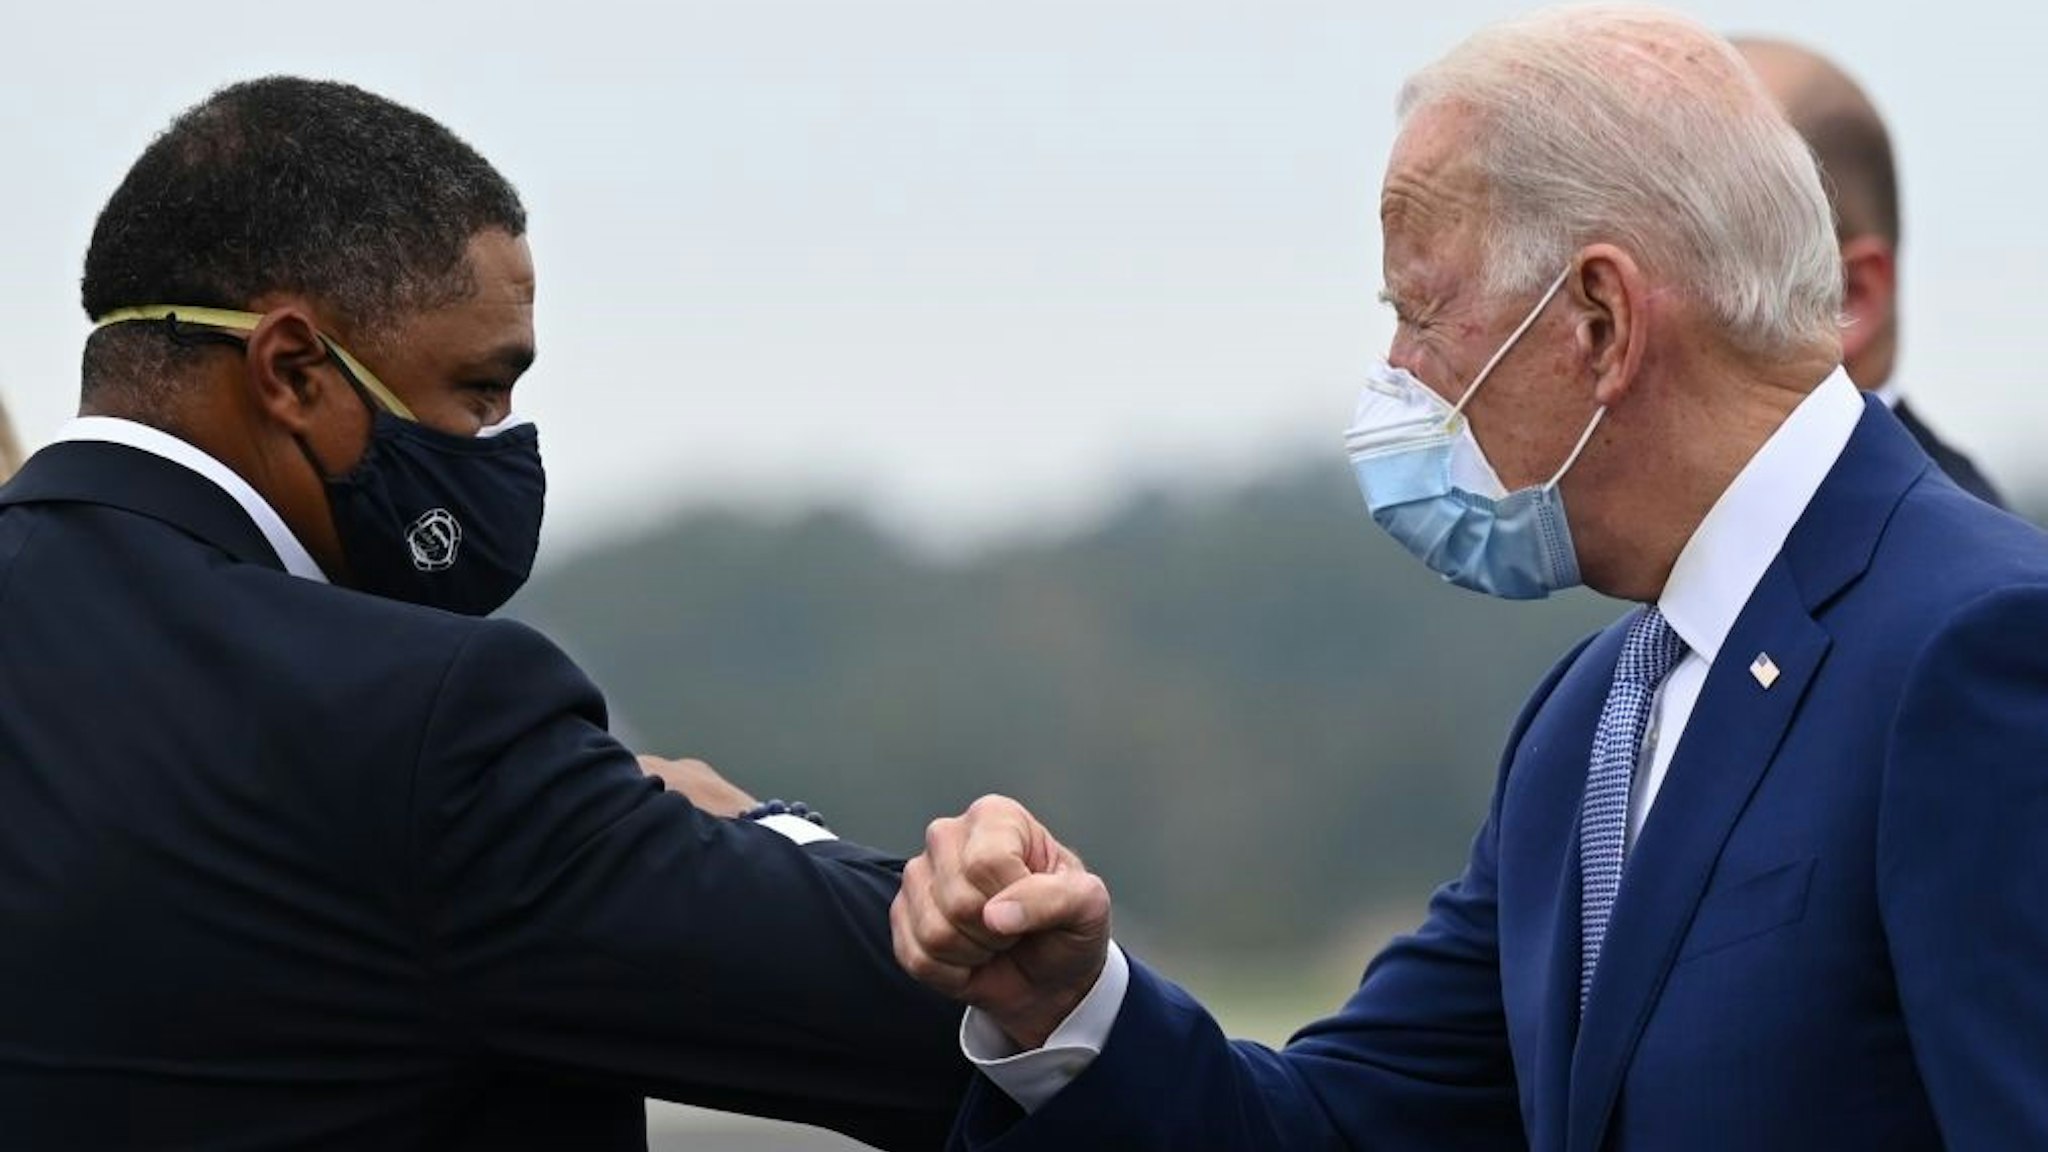 Democratic presidential candidate Joe Biden is greeted by US Congressman Cedric Richmond, D-LA as he arrives in Columbus, Georgia, on October 27, 2020. (Photo by JIM WATSON / AFP) (Photo by